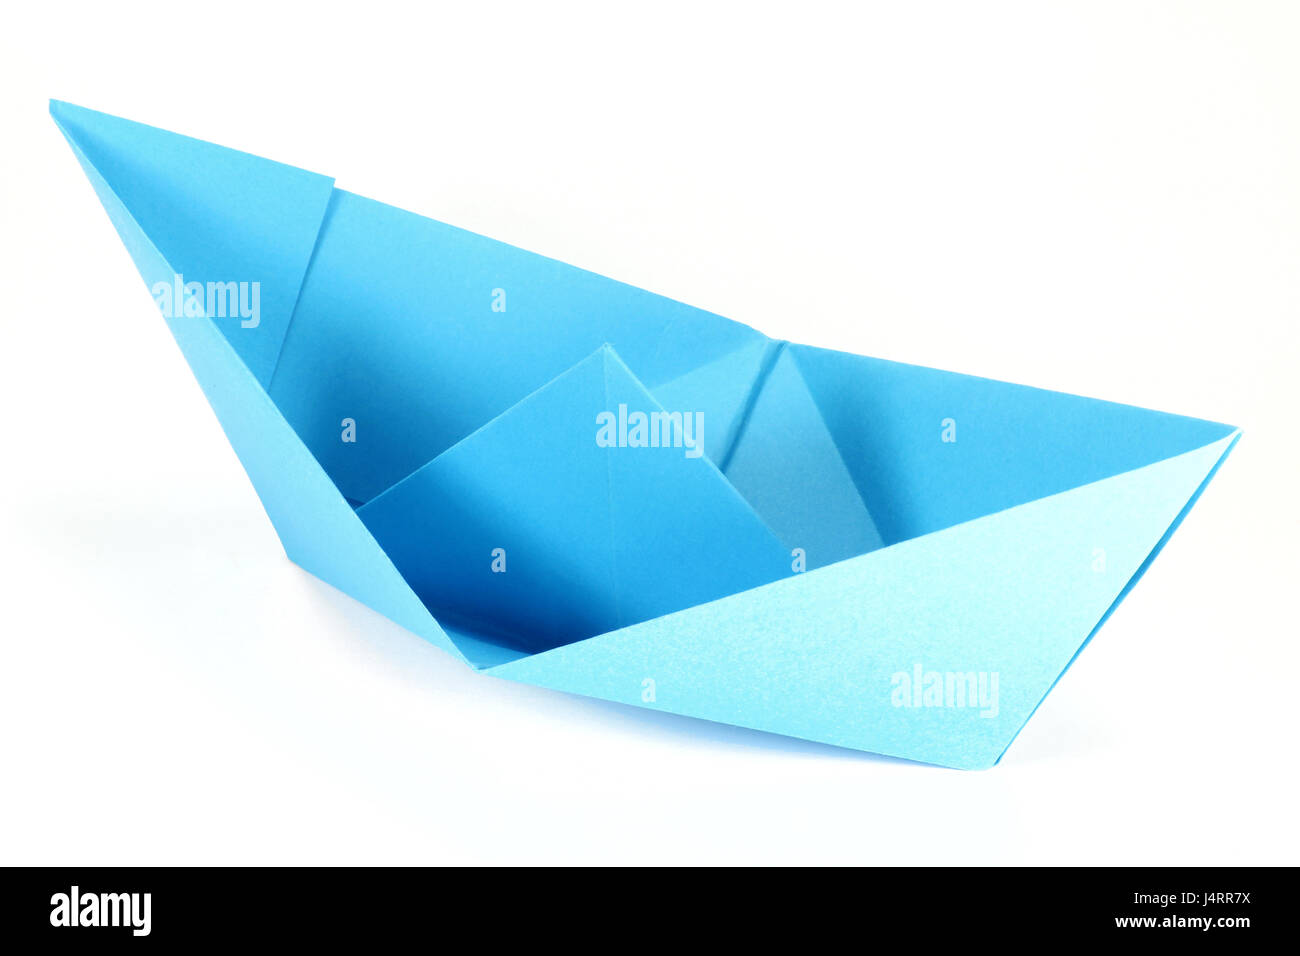 blue paper boat isolated on white background Stock Photo